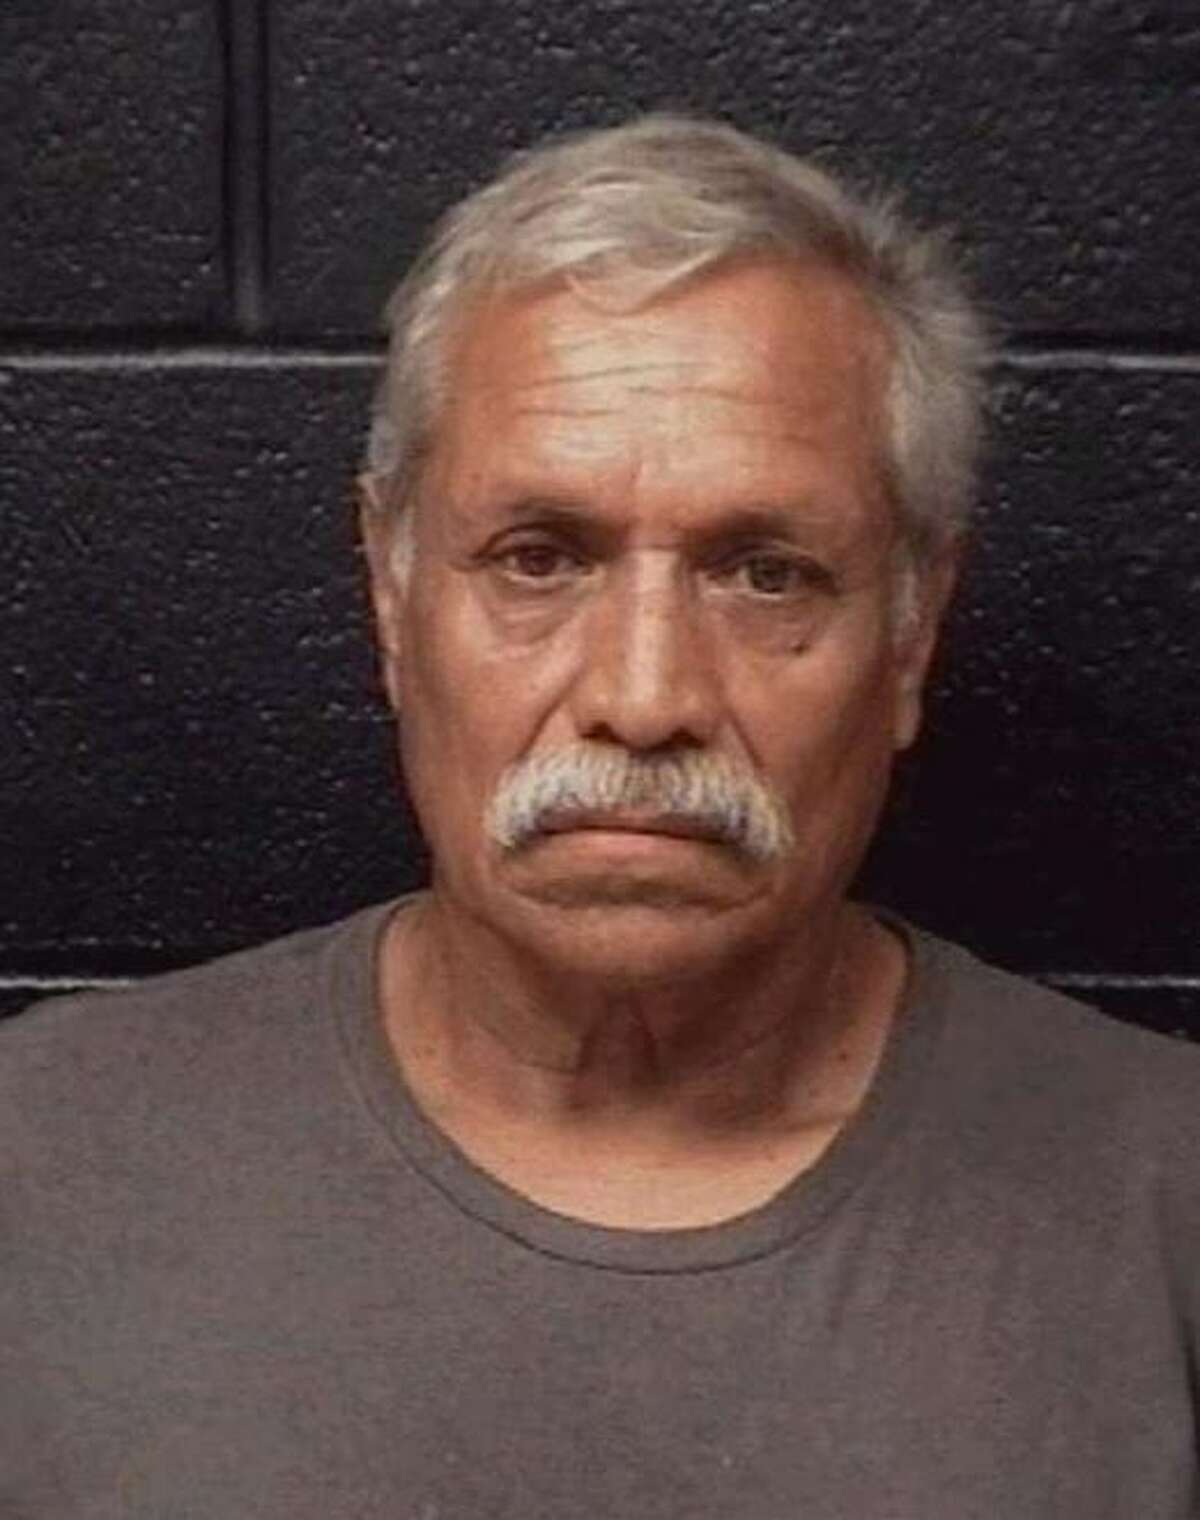 Manuel Hernandez, 62, faces two counts of indecency with a child by sexual contact. 